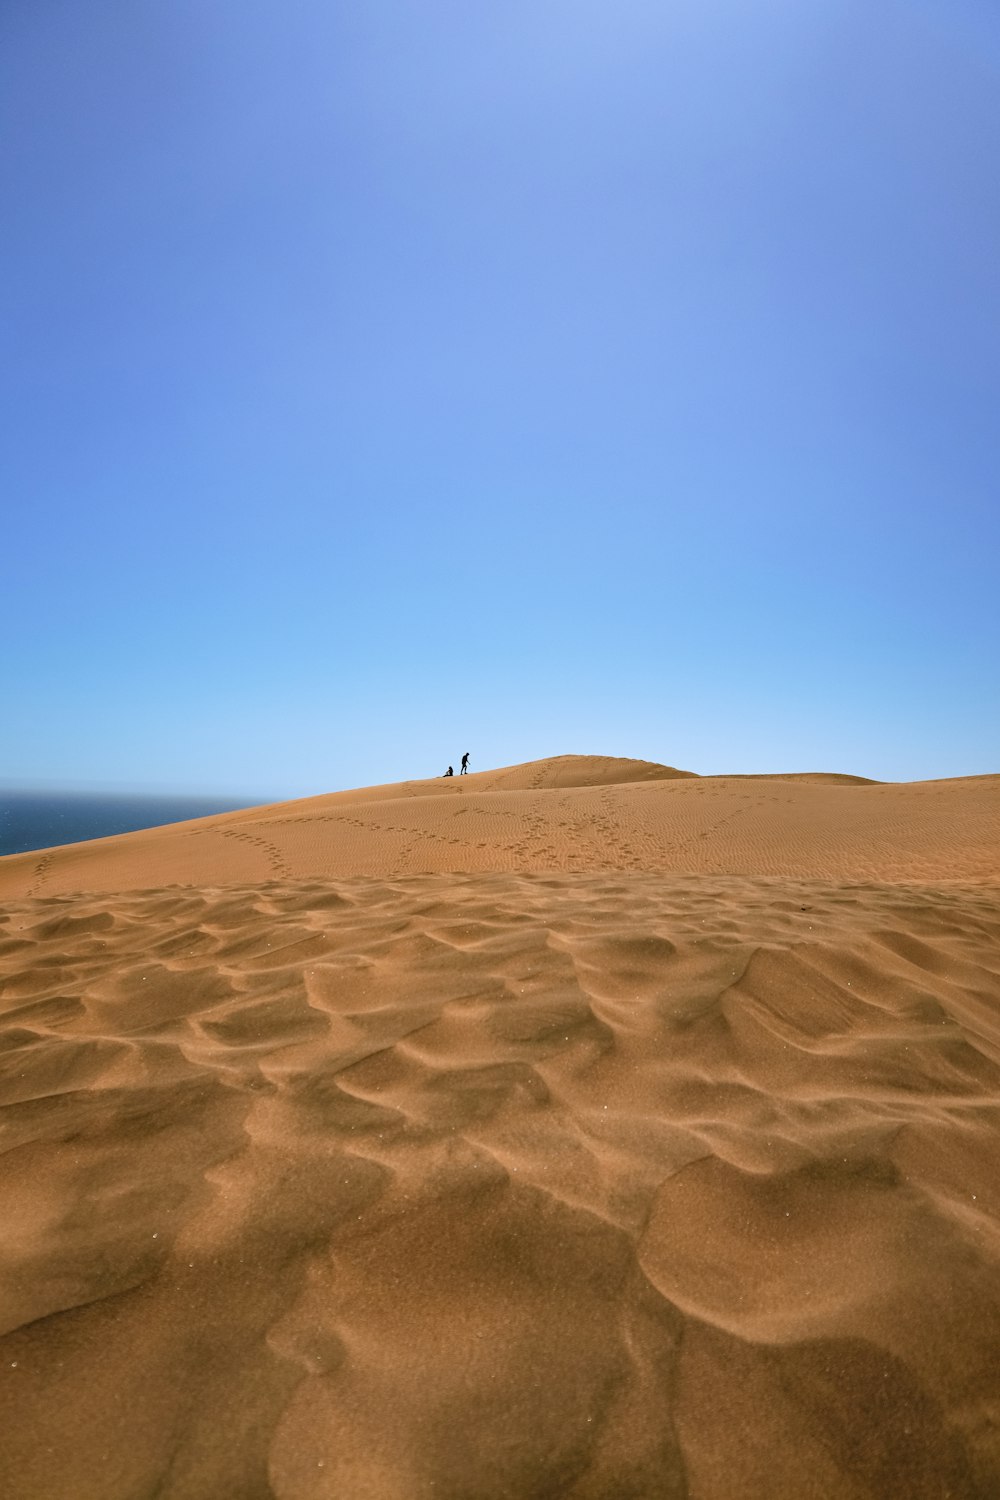 two people are walking on a sand dune